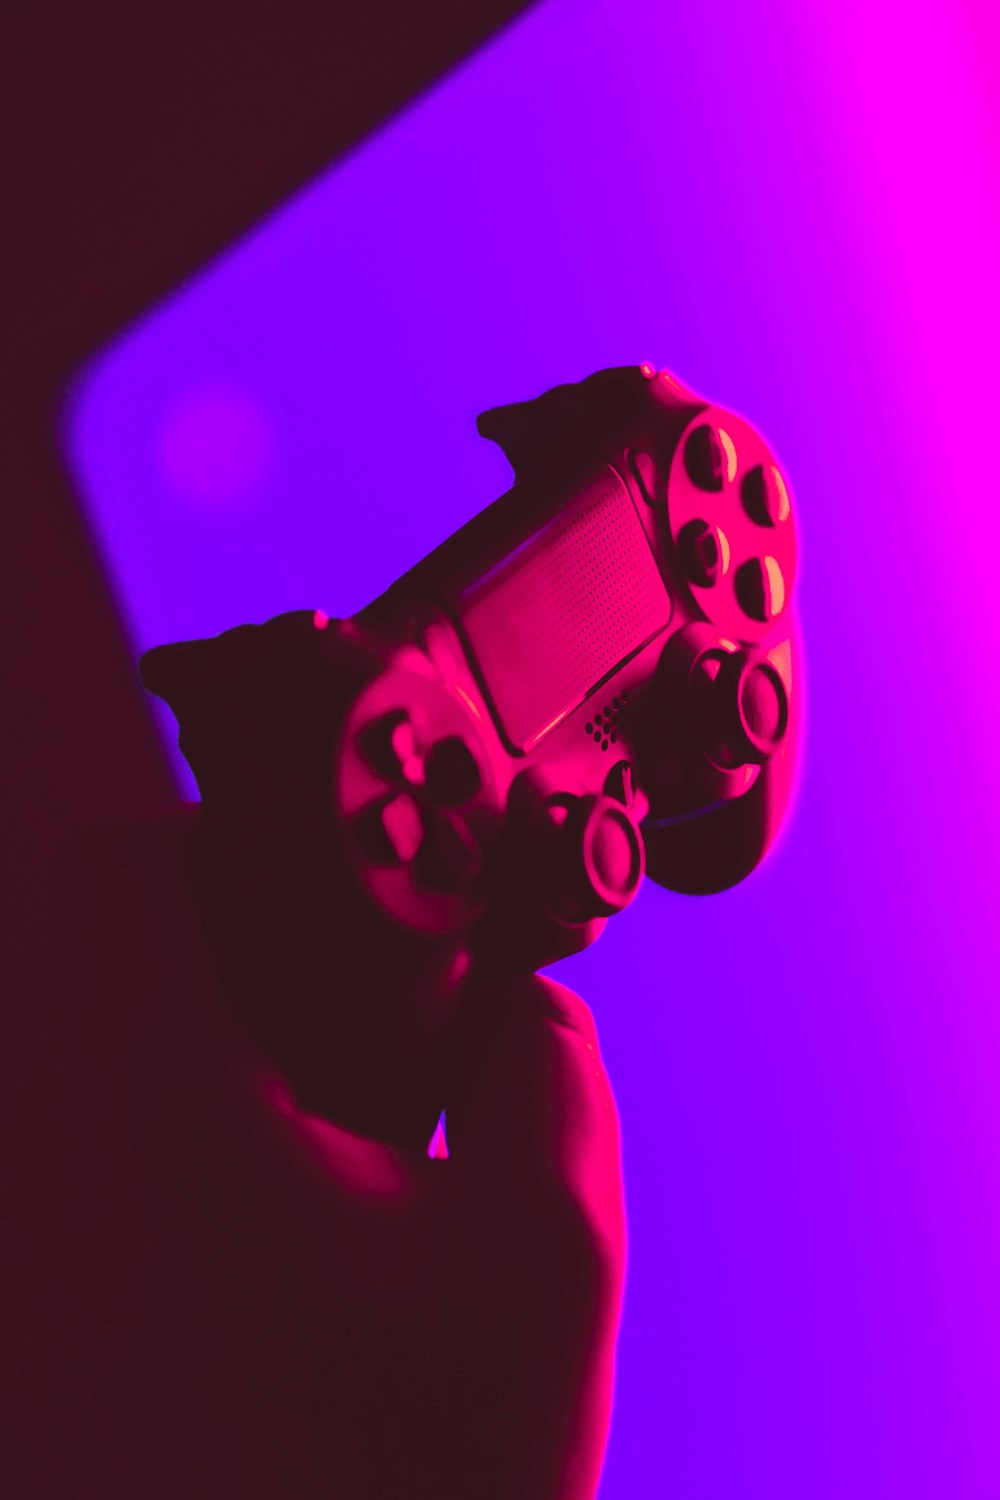 Gaming Photos, Download The BEST Free Gaming Stock Photos & HD Images